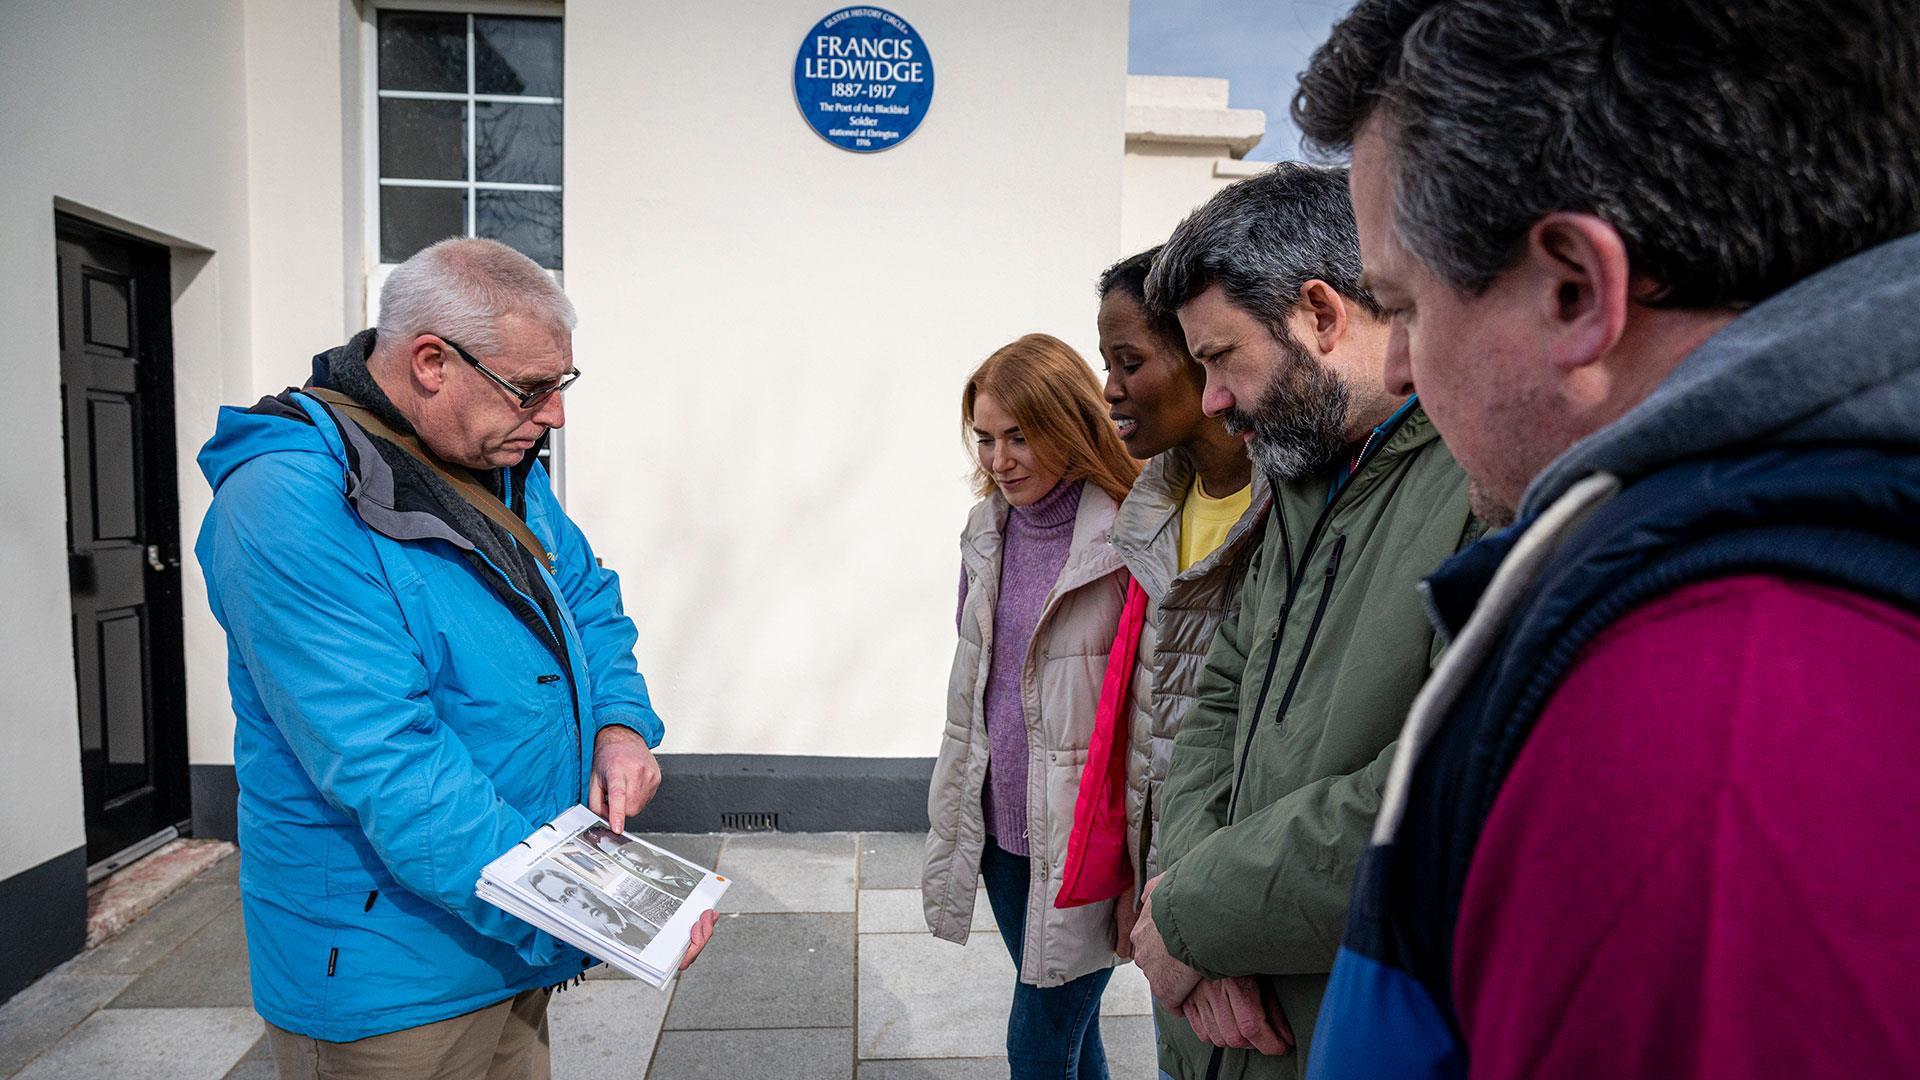 Guide David from Derrie Danders showing a group some literature from his tour